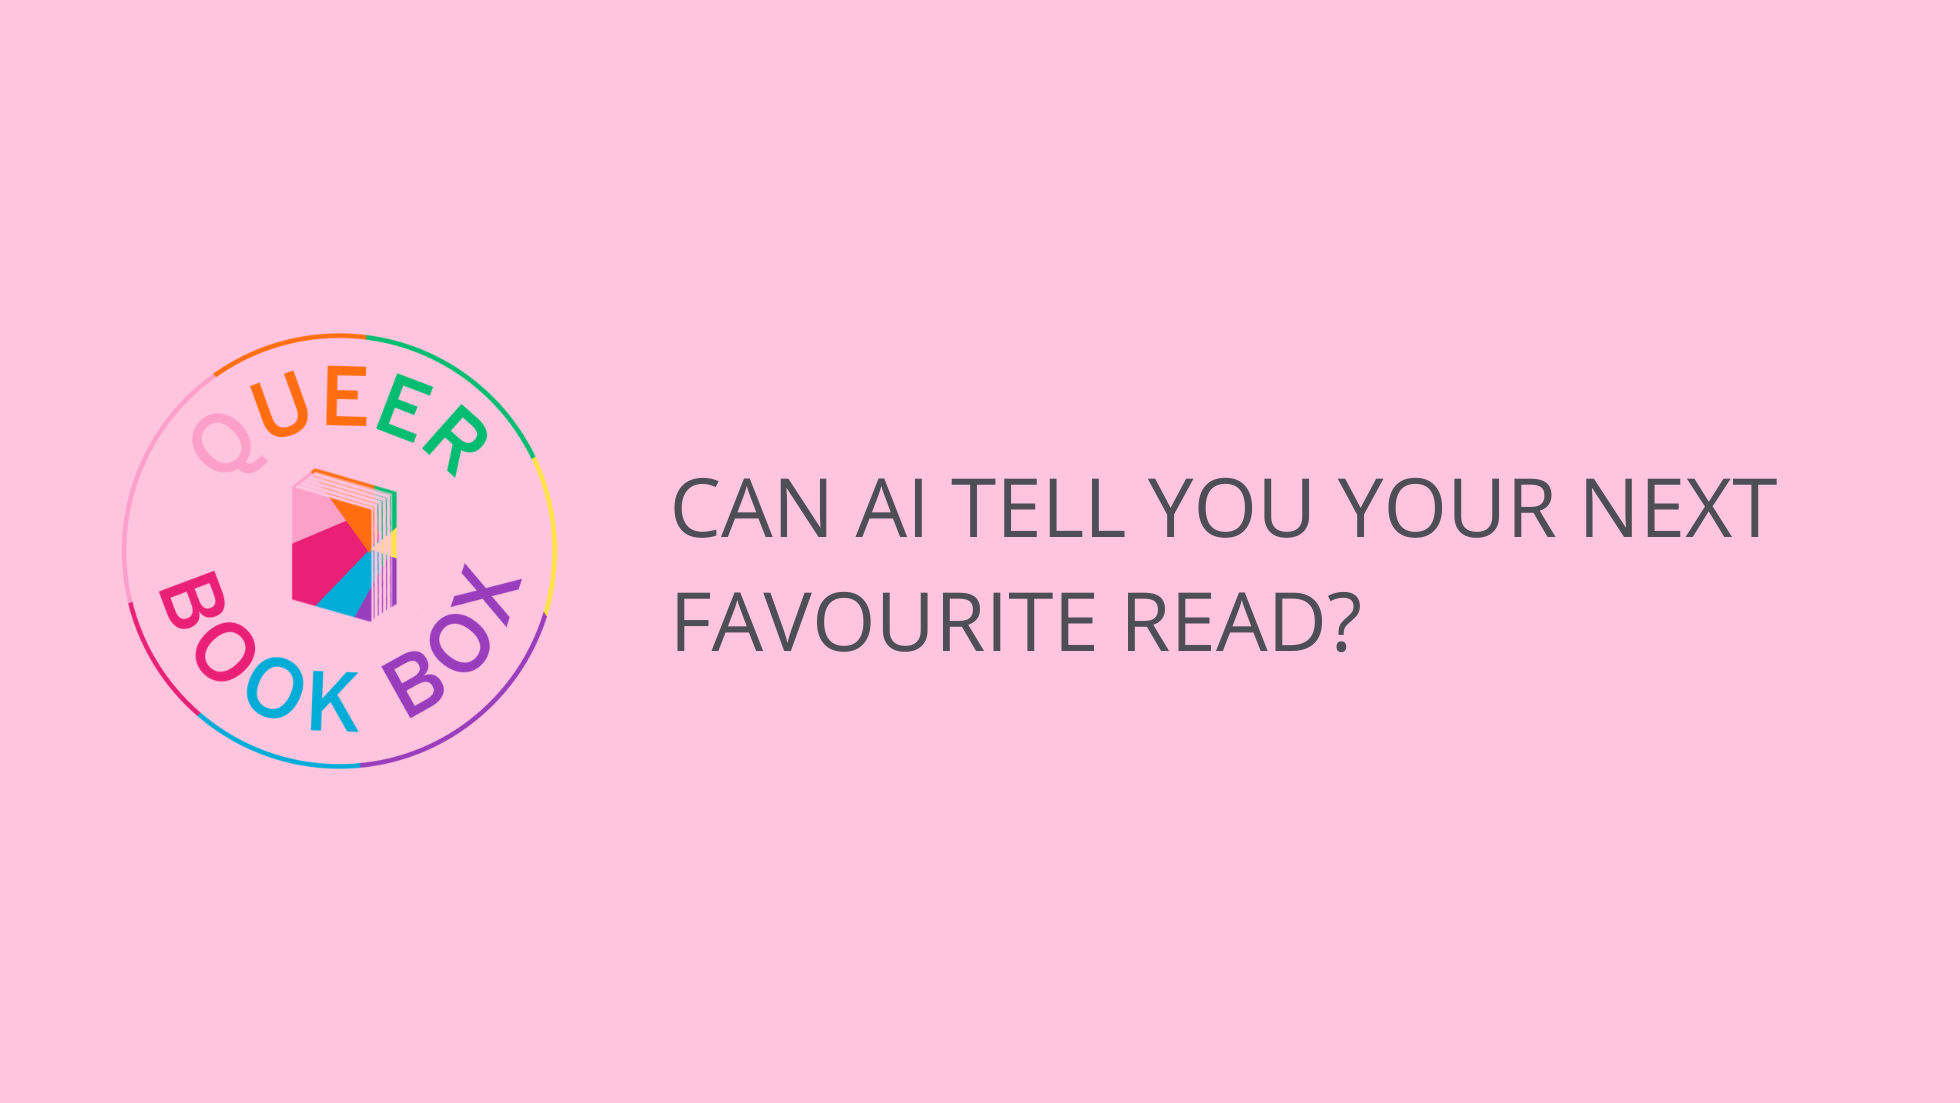 Can AI recommend your next favourite read? We asked AI to recommend queer books for us, this is what happened.